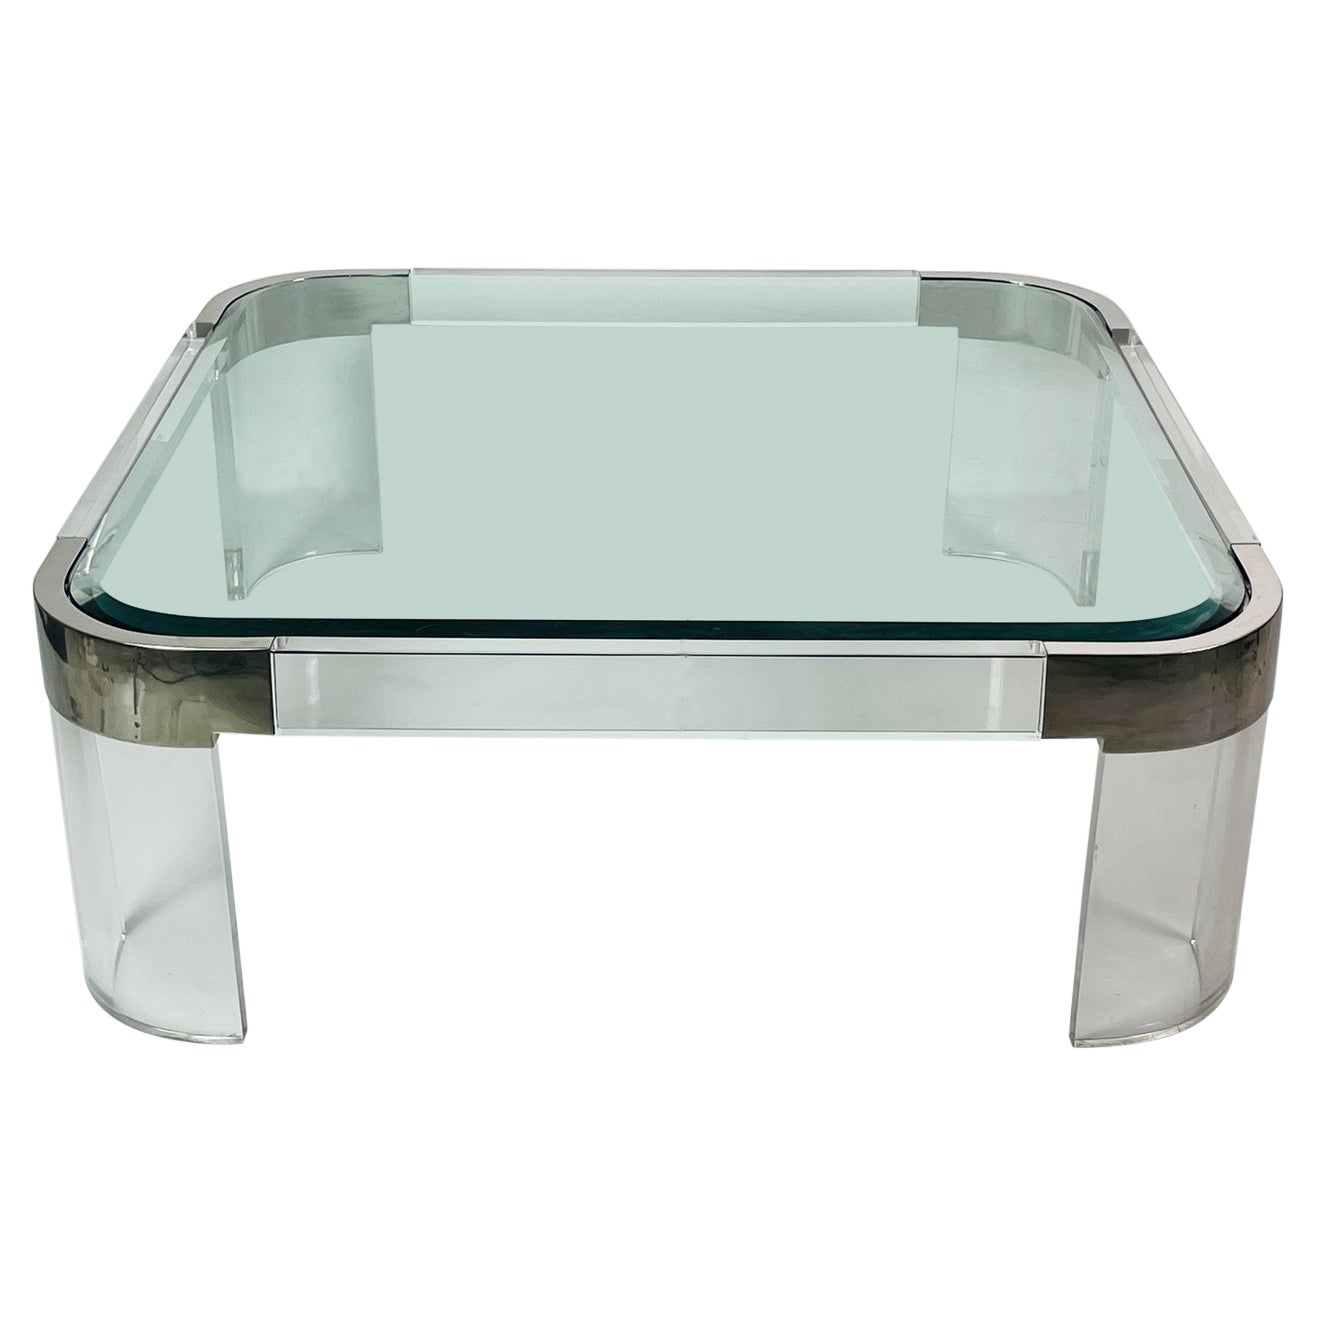 Charles Hollis Jones Waterfall Coffee Table in Lucite, Glass & Polished Nickel For Sale